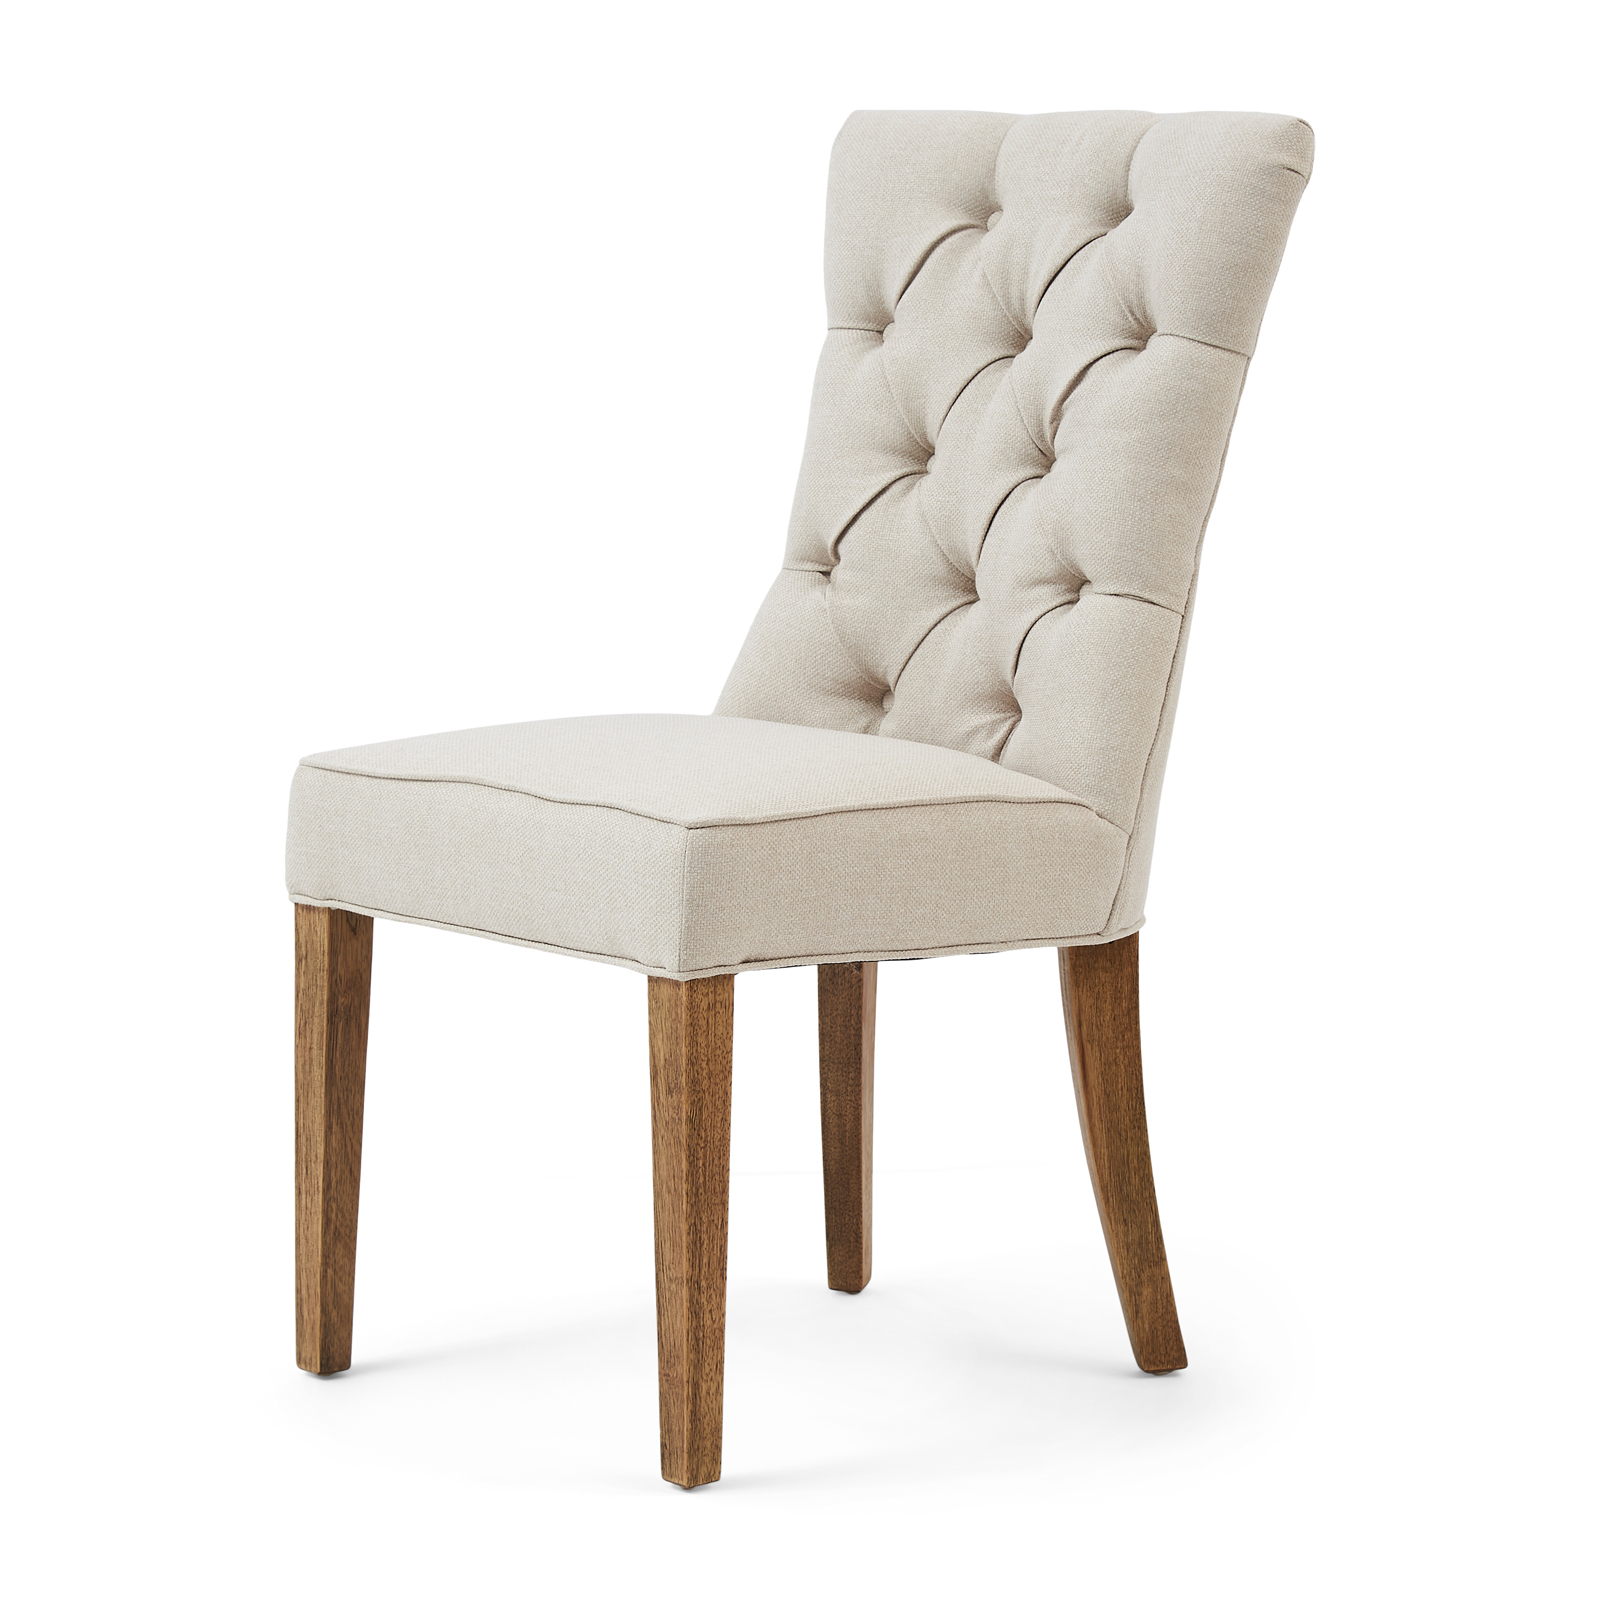 Balmoral Dining Chair, oxford weave, flanders flax